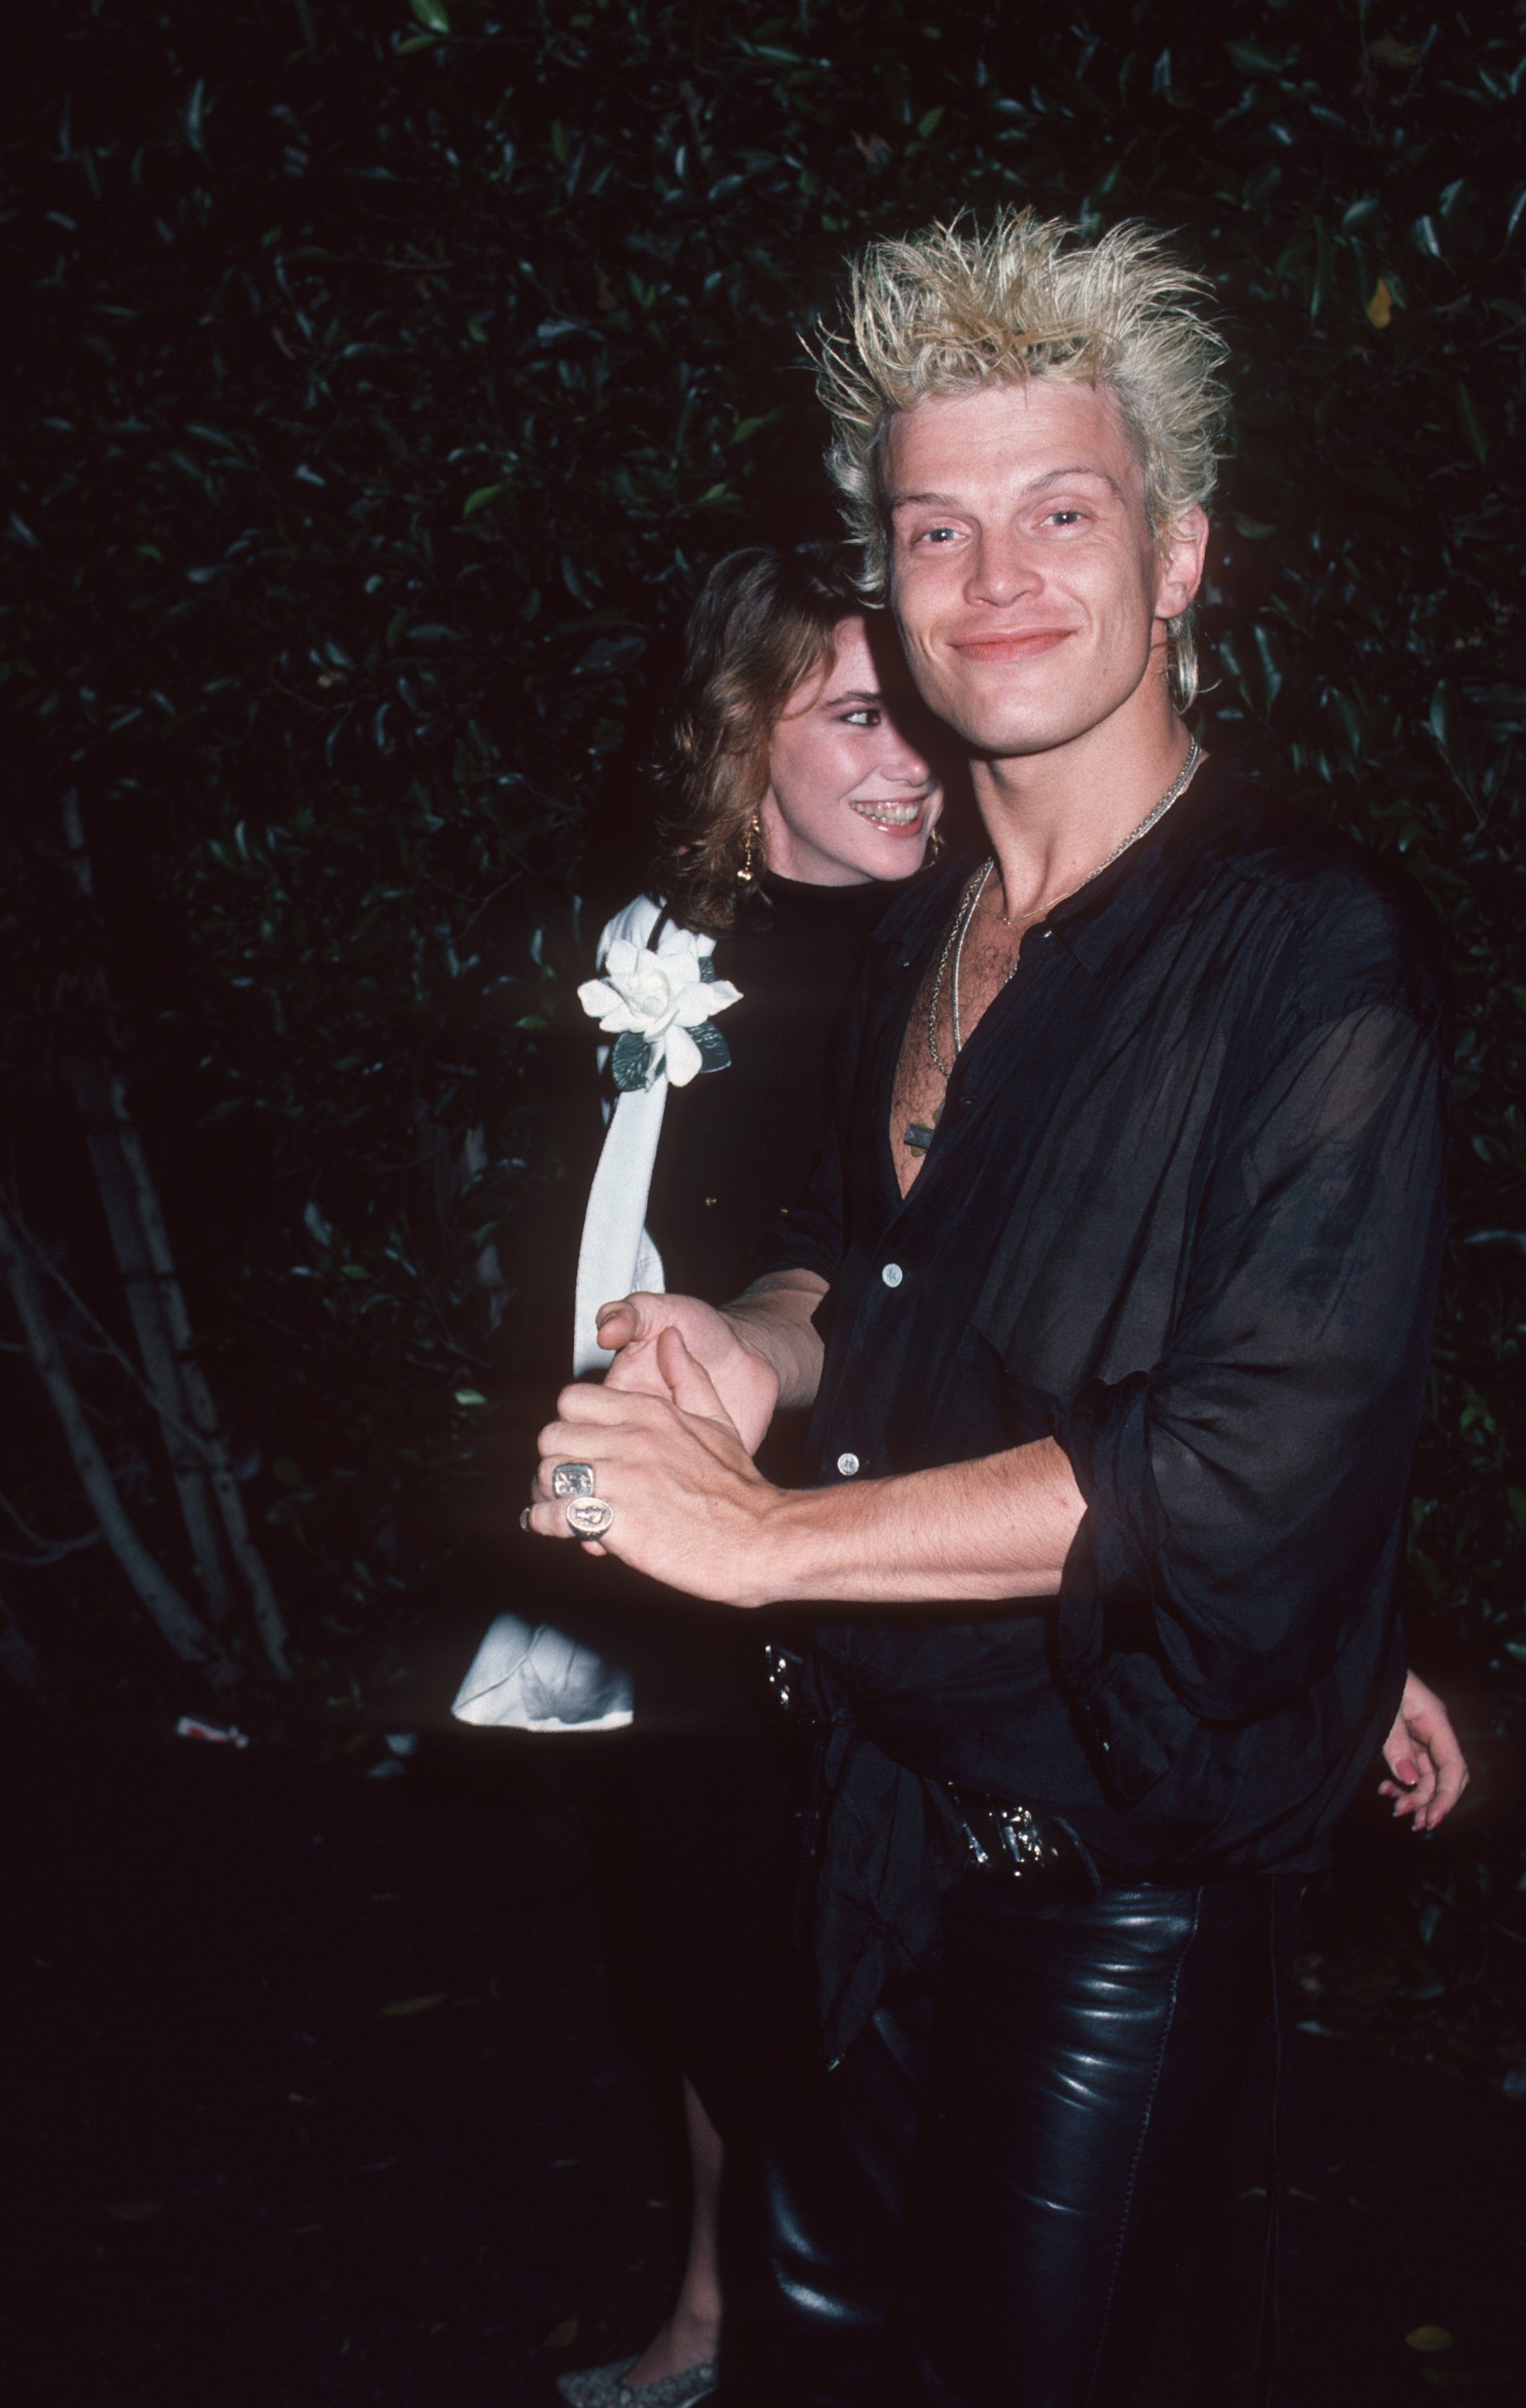 Billy Idol and Melissa Gilbert outside Le Dome Restaurant together in 1986